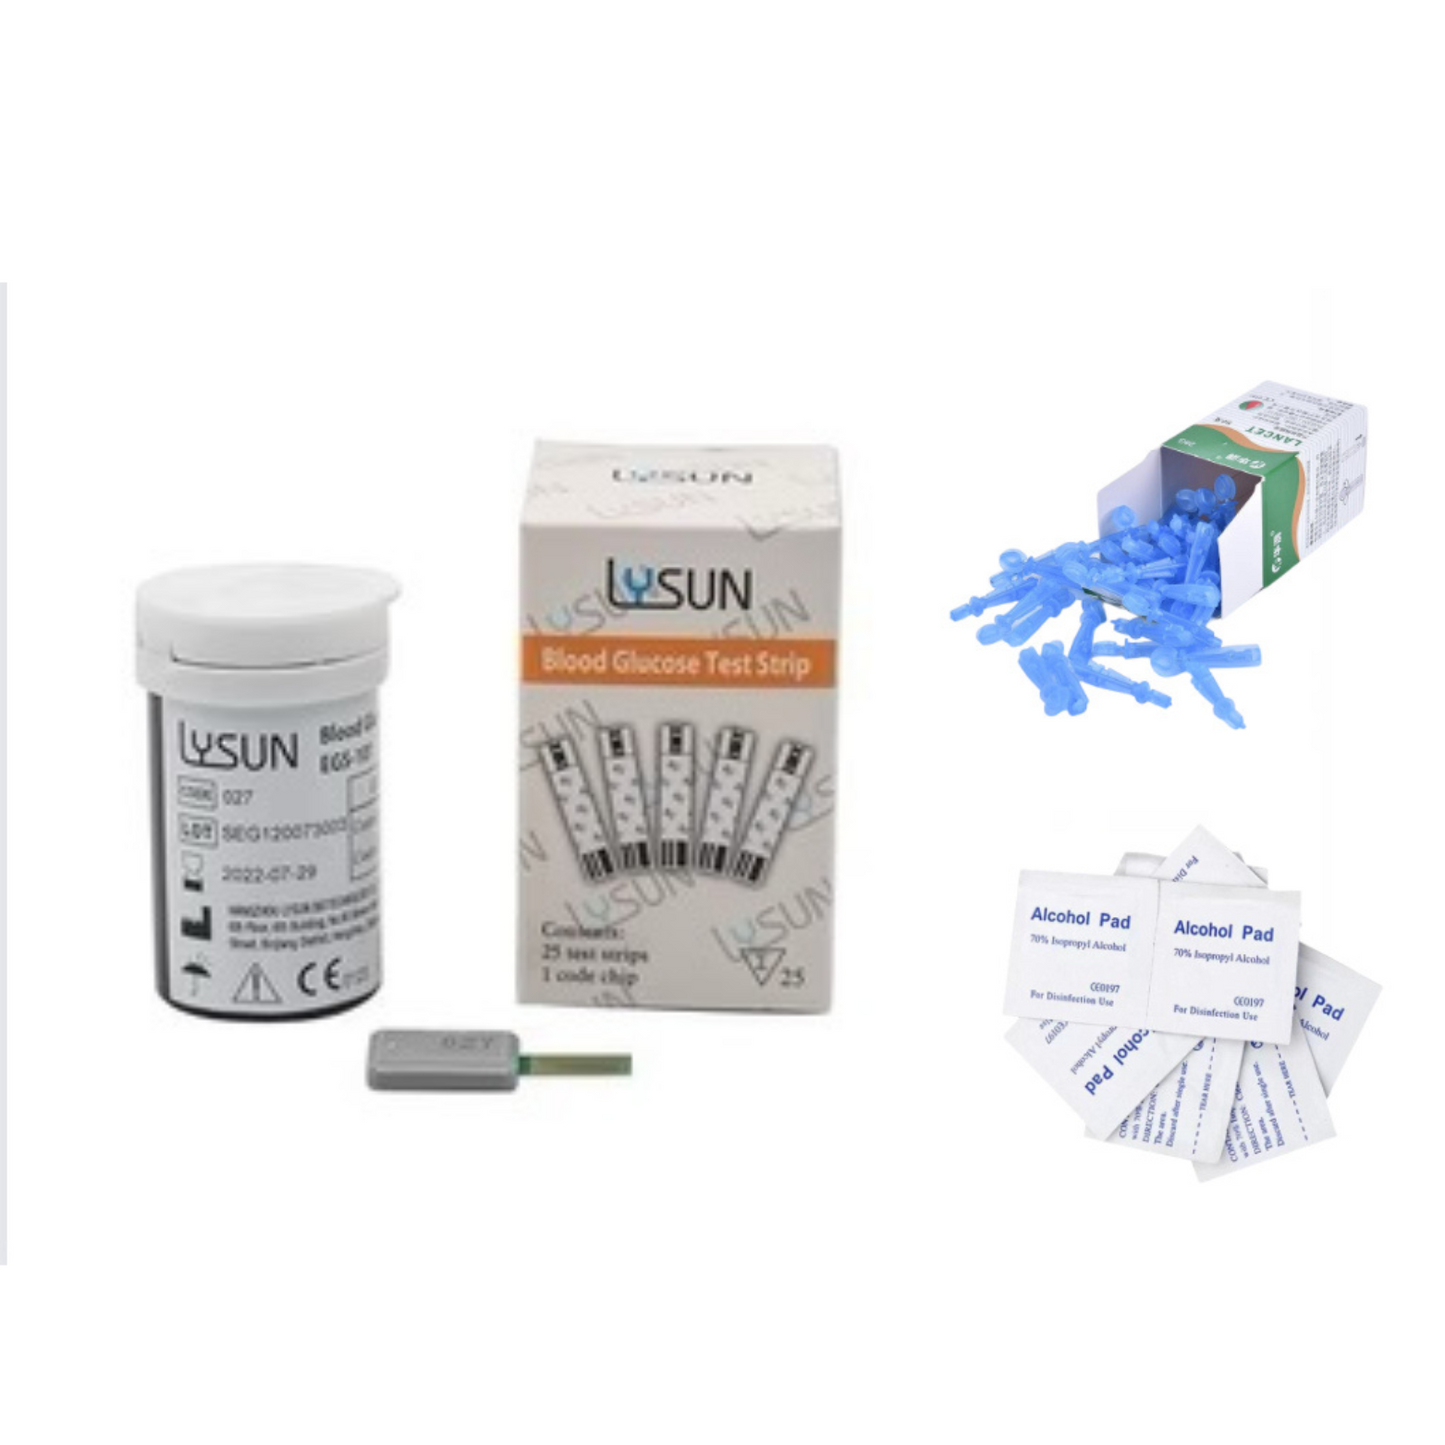 LYSUN Blood Glucose Test Strips with Free Lancets and Alcohol Pads